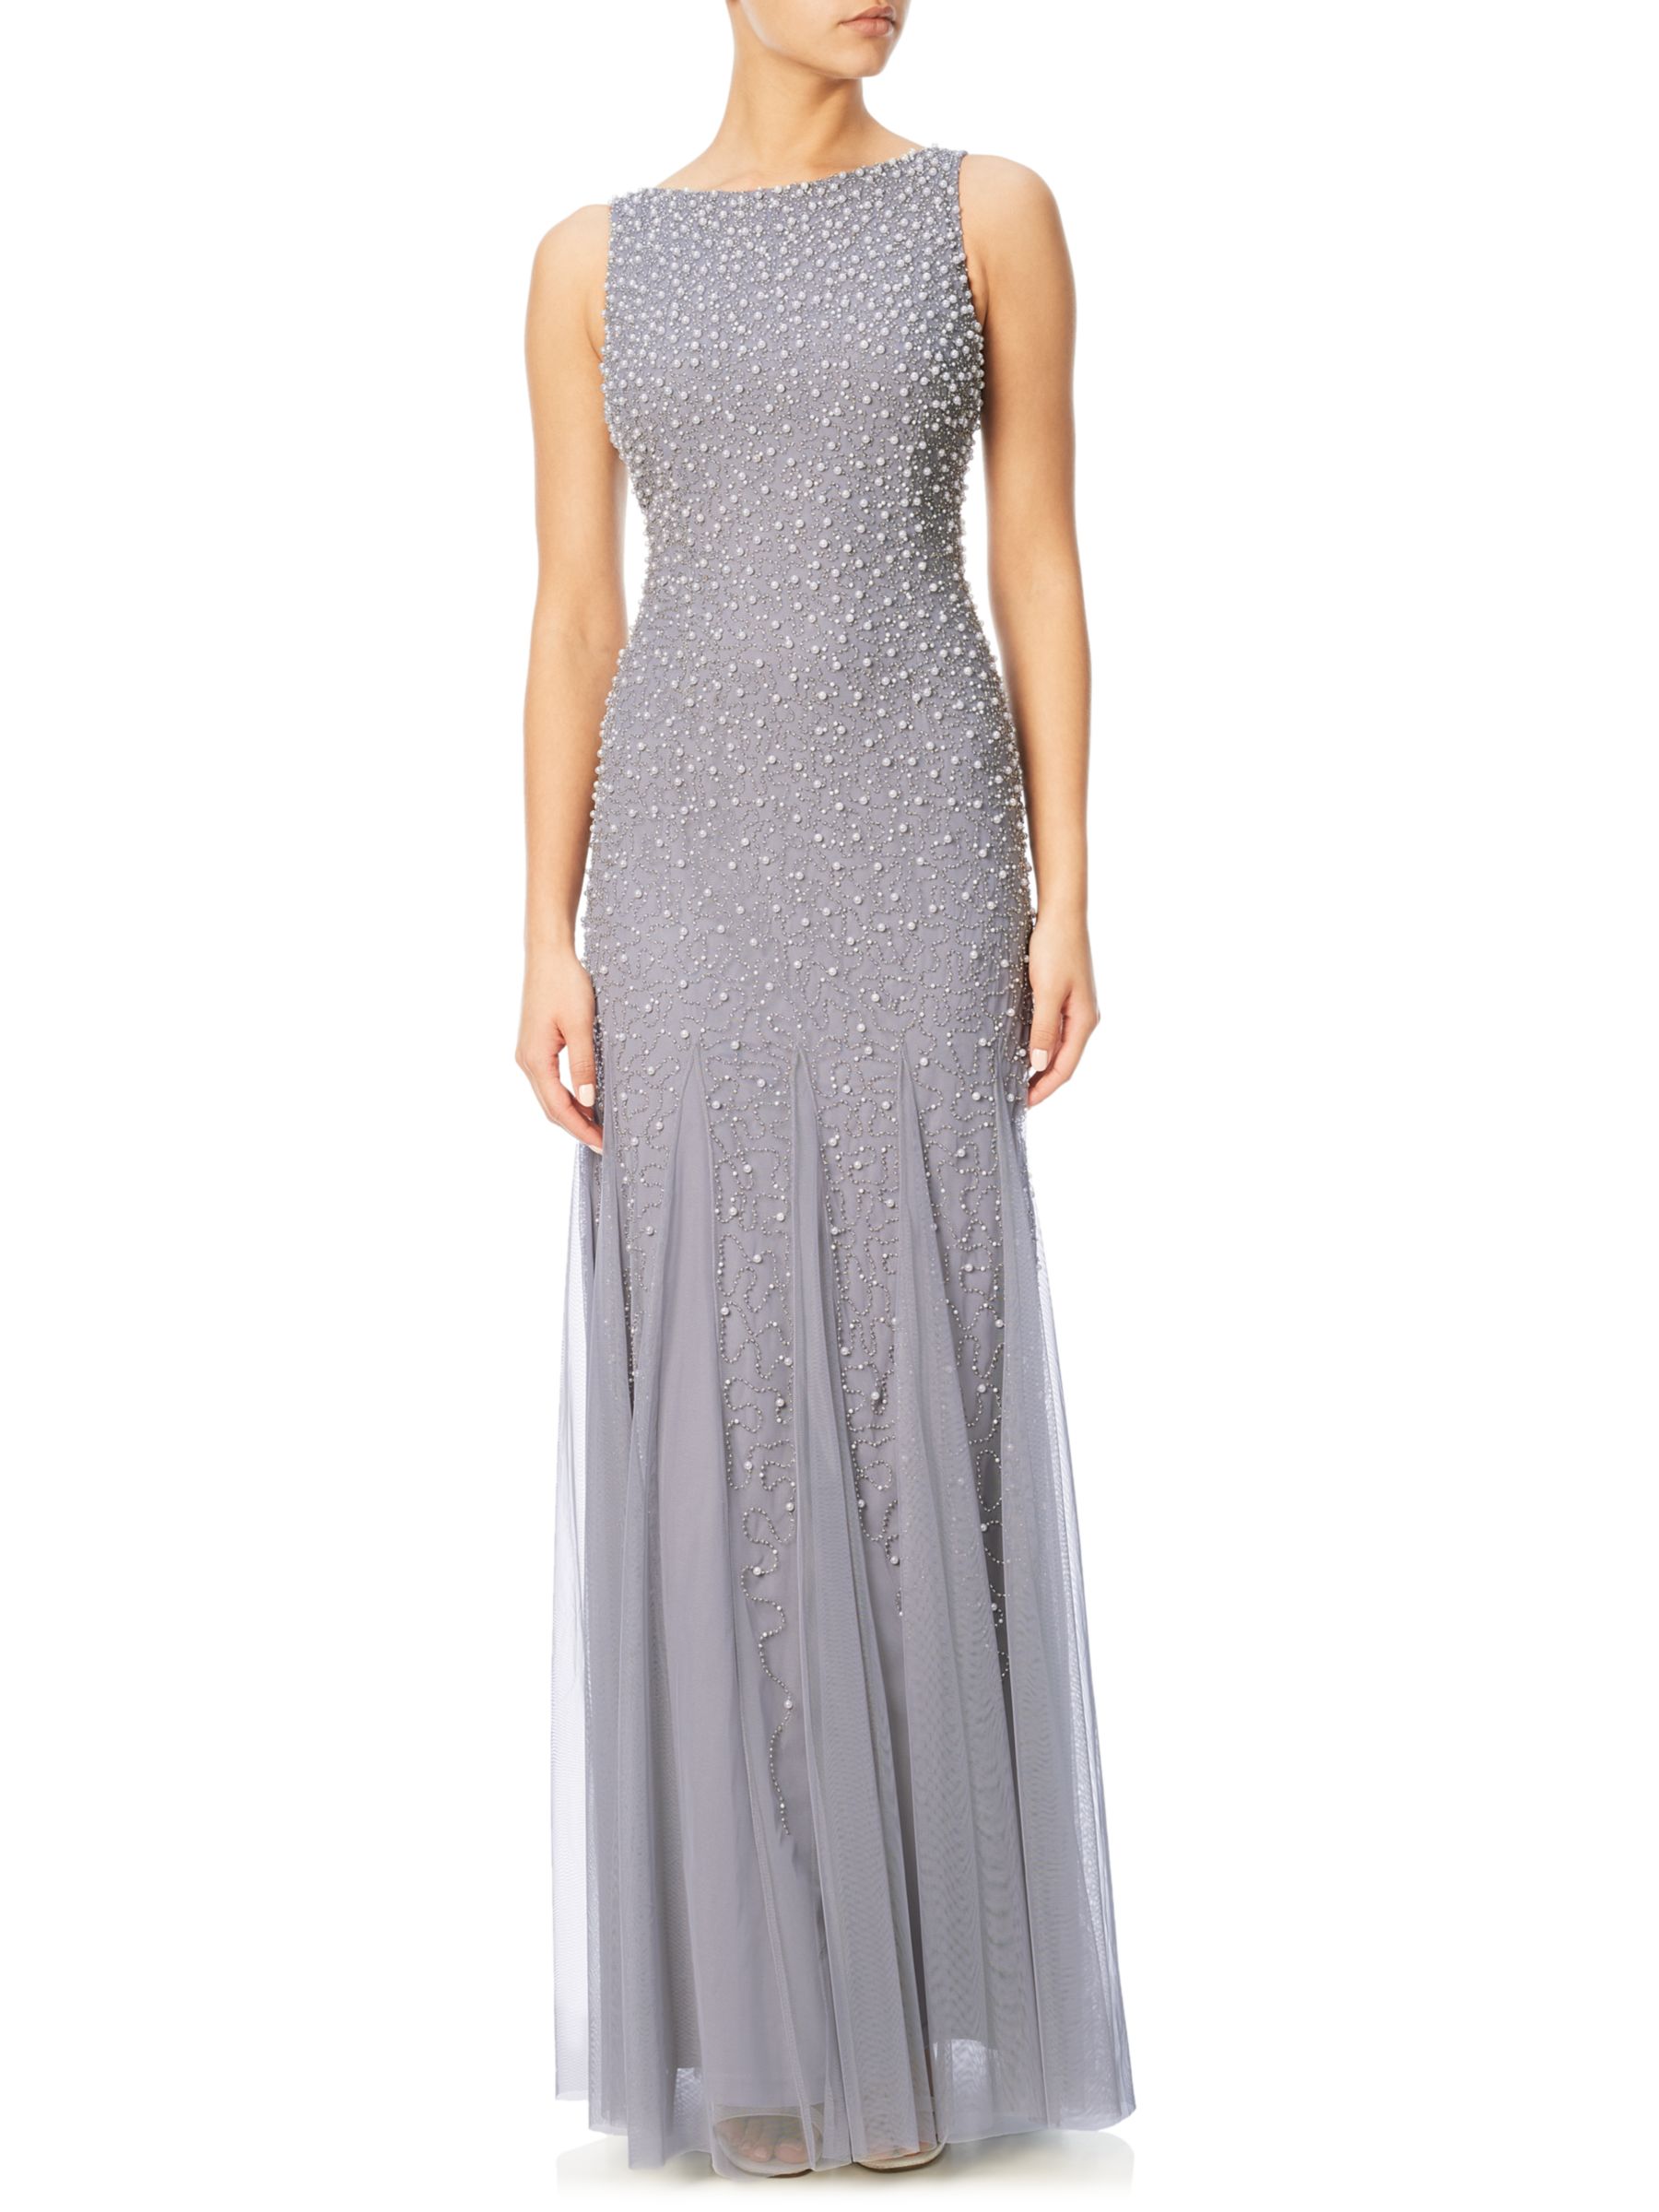 Adrianna Papell Boat Neck Gown, Silver Grey